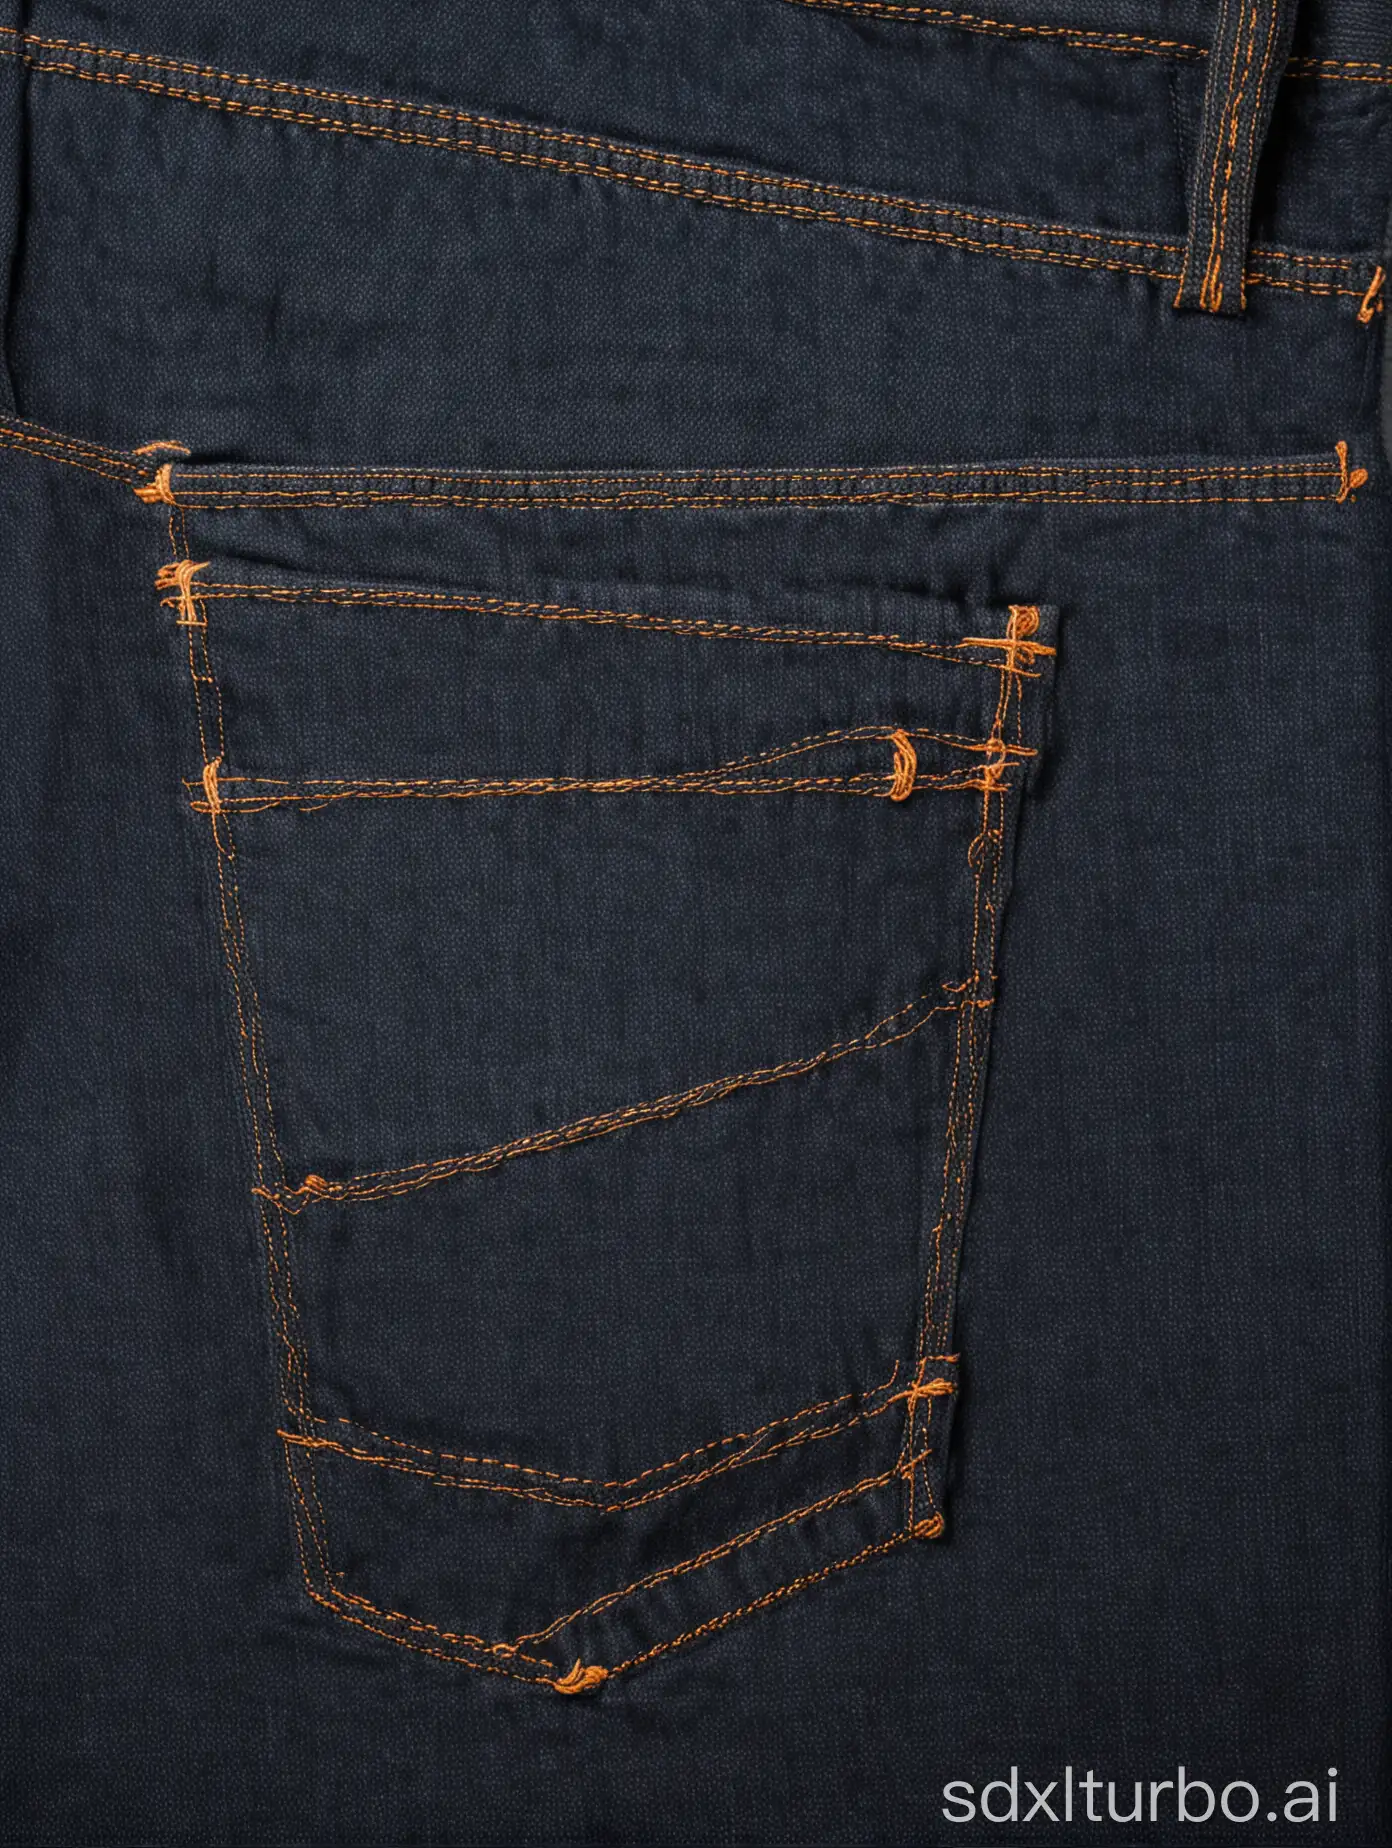 A close-up of a pair of jeans, showing the stitching and fabric. The jeans are dark blue and have a classic five-pocket design.